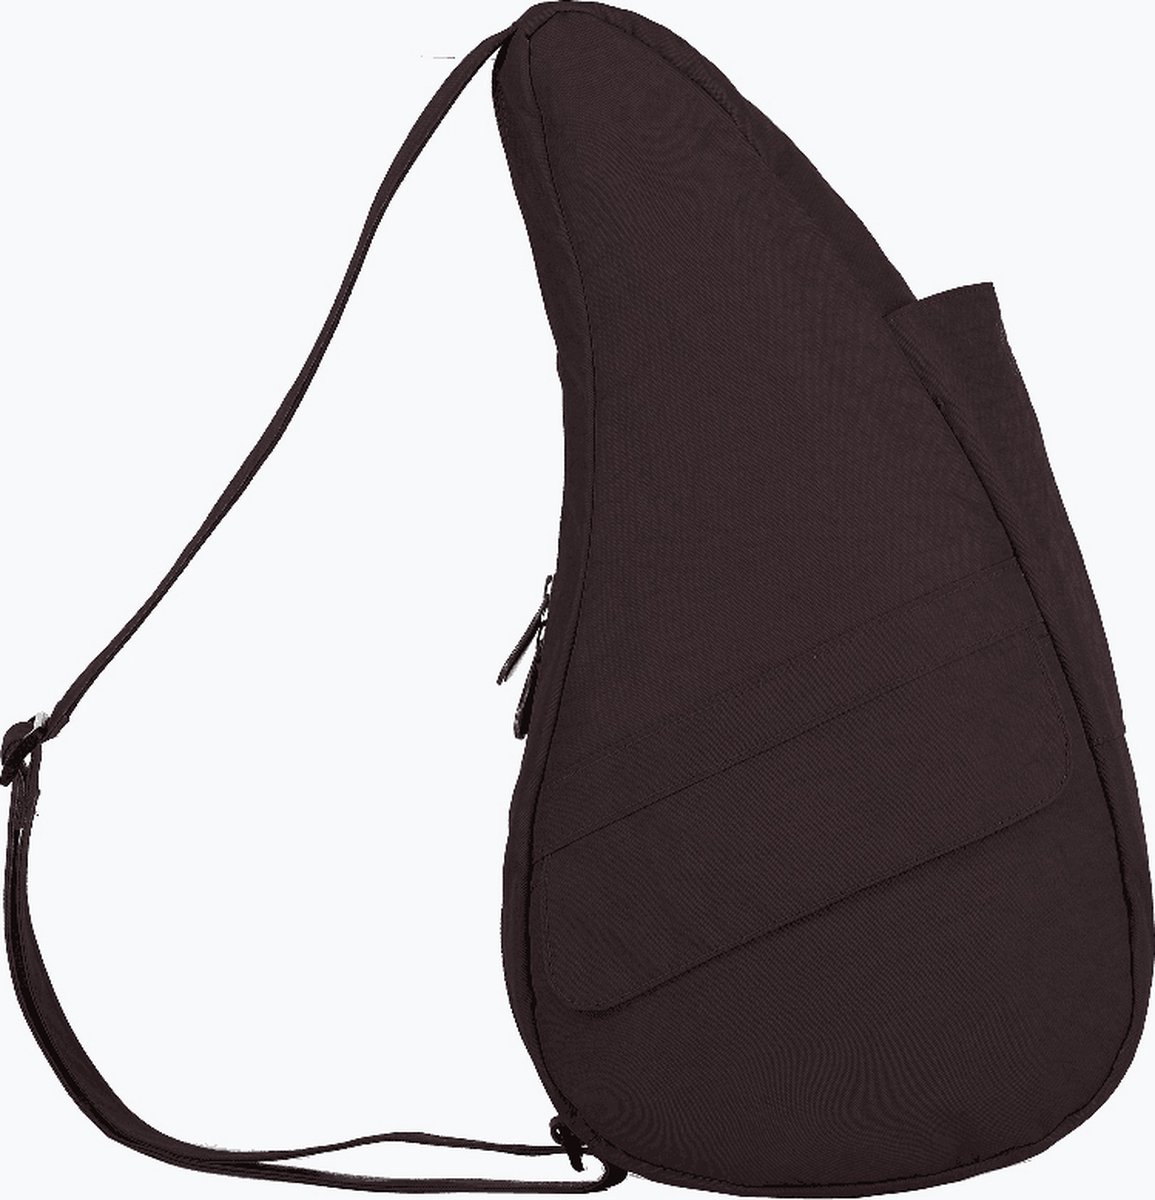 The Healthy Back Bag M The Classic Collection Textured Nylon Raisin